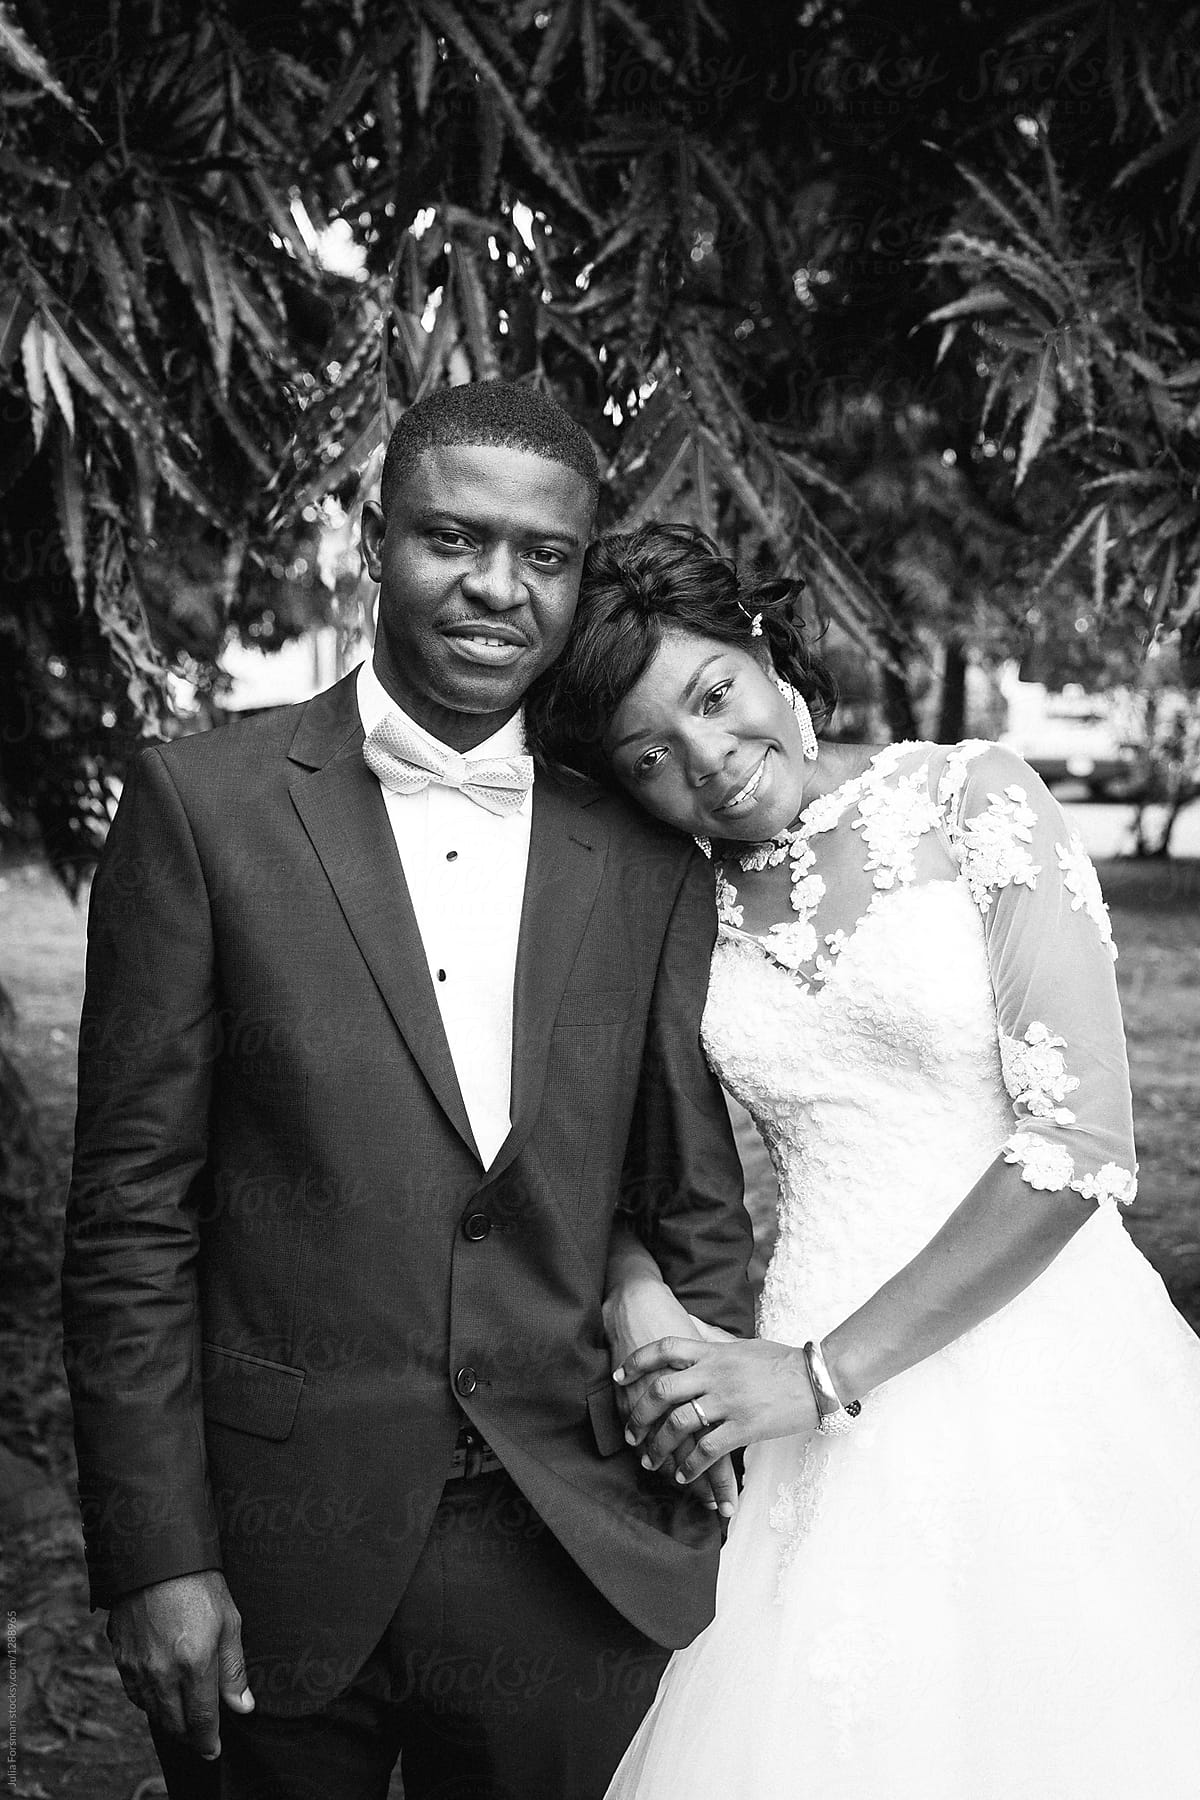 Black and white relaxed portrait of bride and groom.